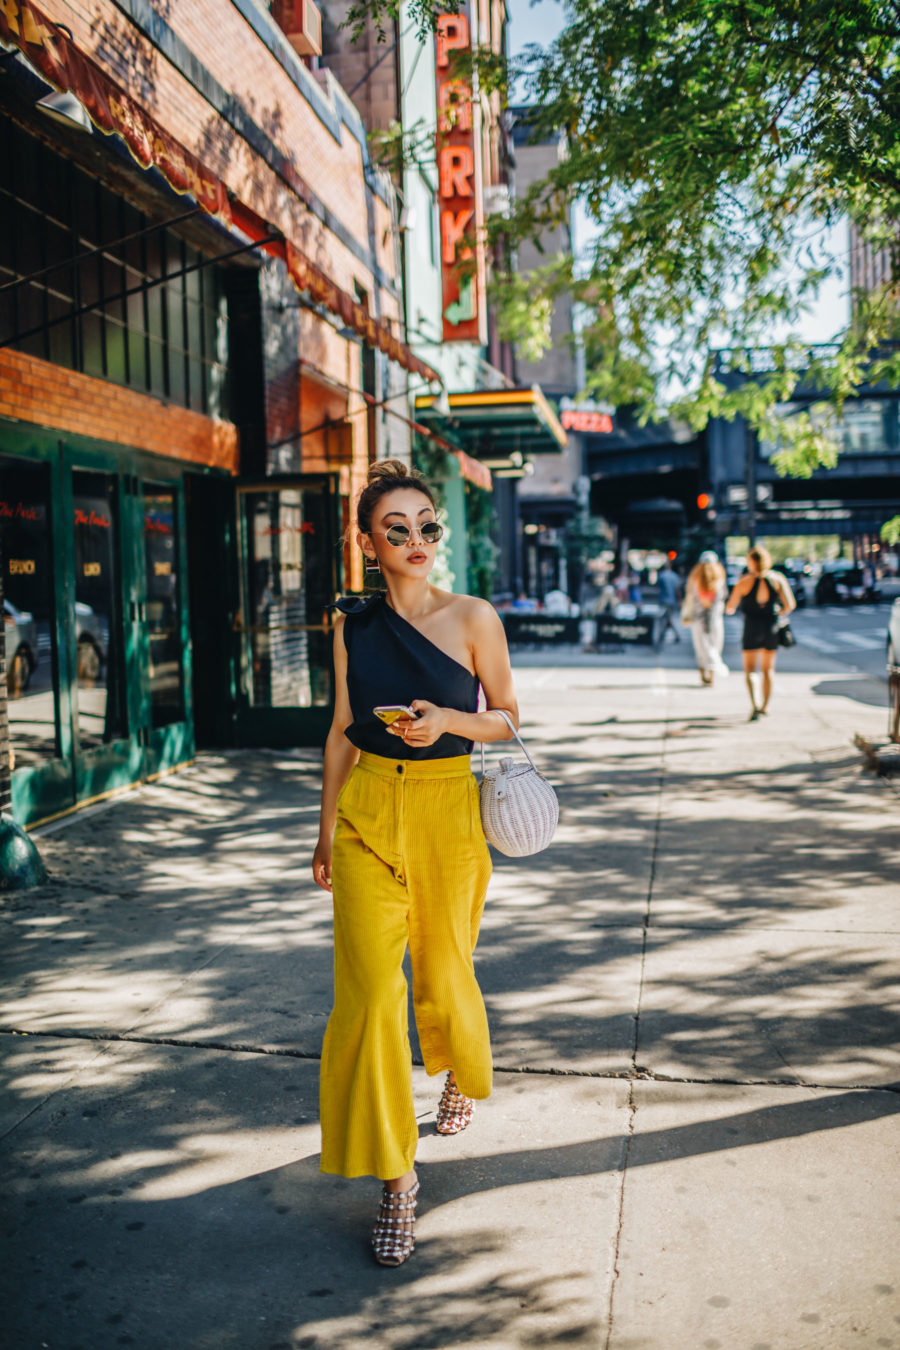 Summer Date in the City - Date night outfit, uber safety toolkit // Notjessfashion.com